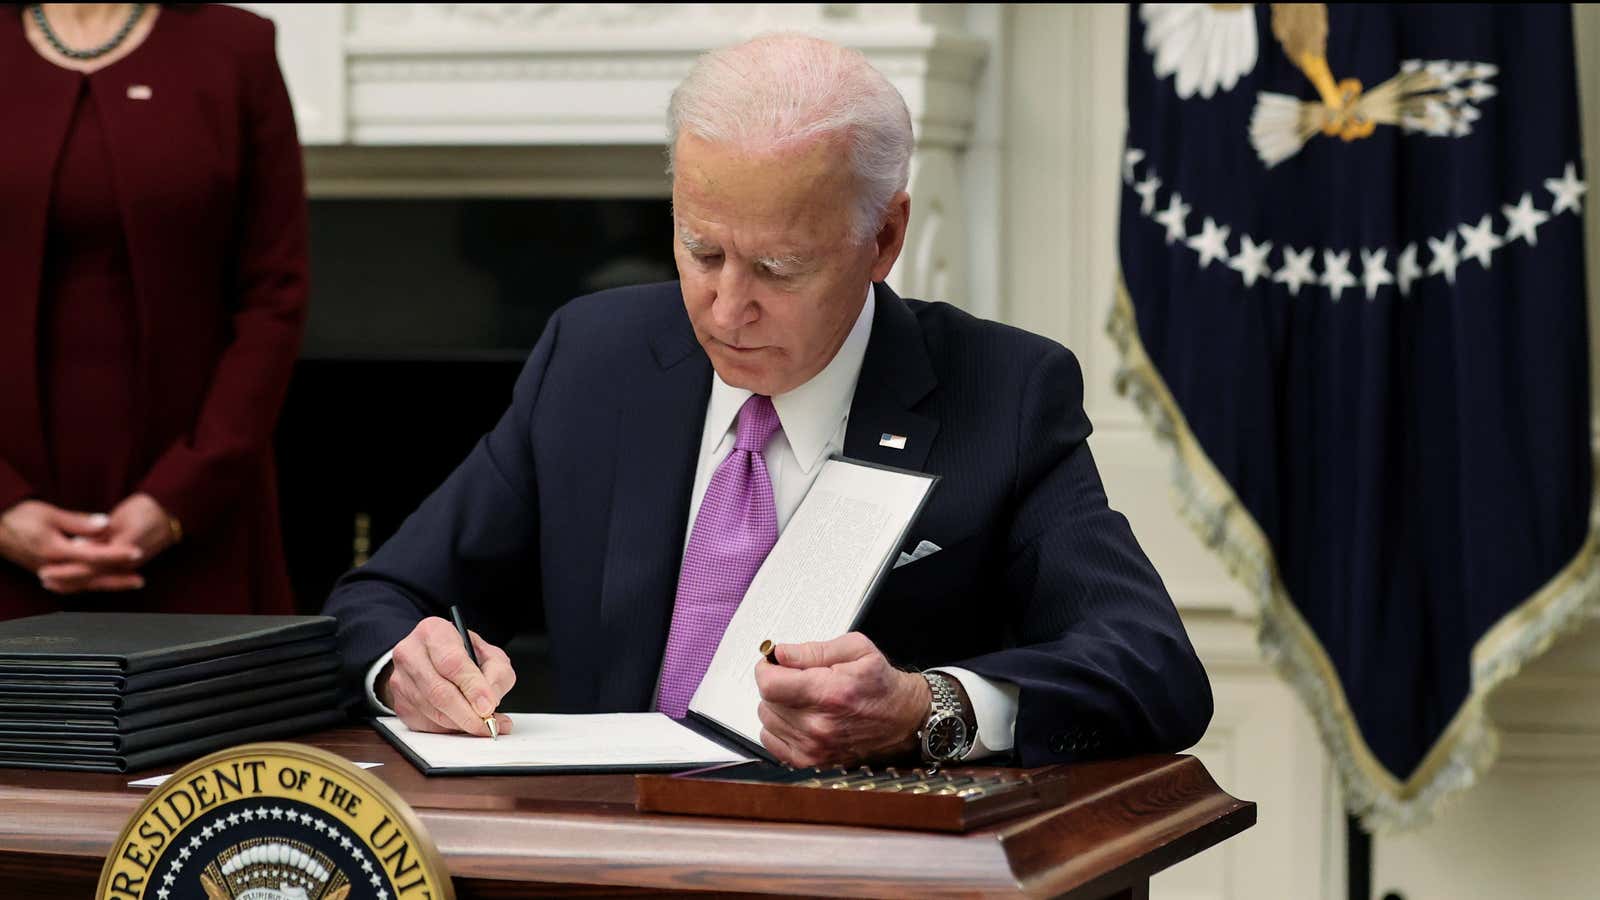 U.S. President Joe Biden signs an executive order as part of his administration’s plans to fight the coronavirus disease (COVID-19) pandemic during a COVID-19 response…